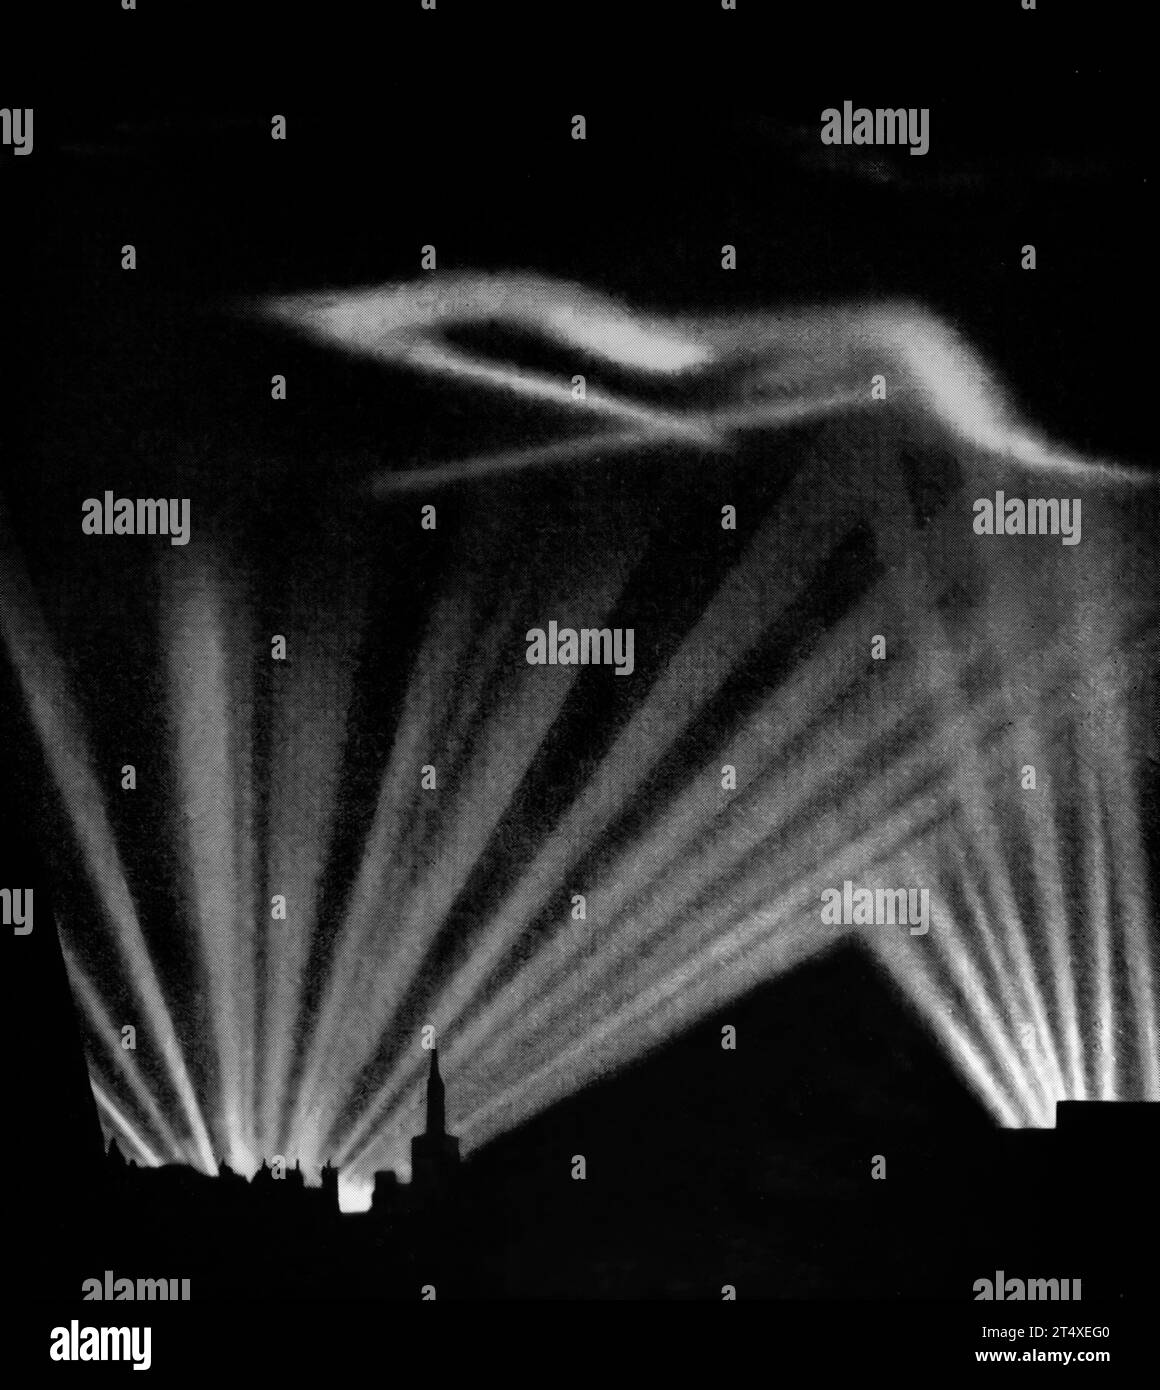 Shortly after midnight on the 21st August 1940, the first bombs were dropped by the Luftwaffe on London, England. Continuing for many nights, the darkness was lit by patterns of searchlights. Stock Photo